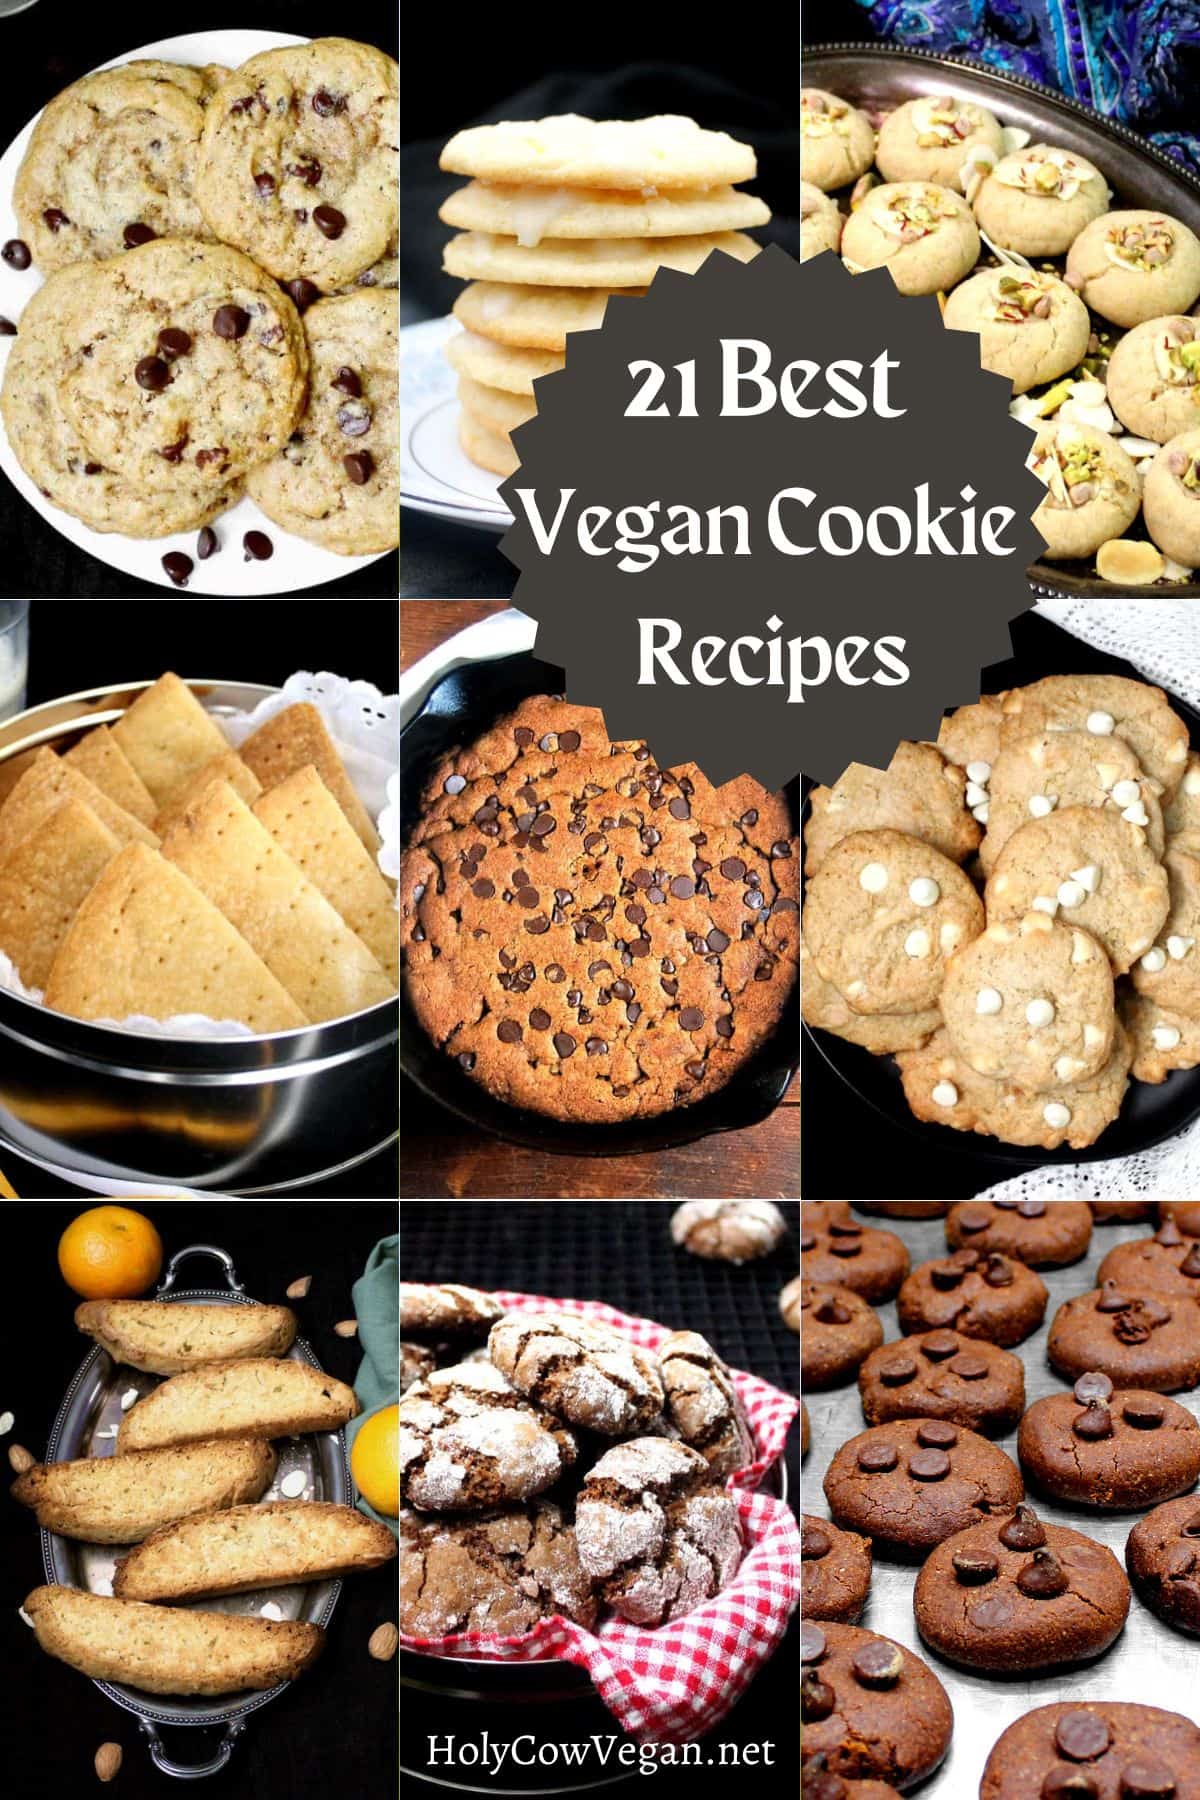 Vegan cookies images with text that says "21 best vegan cookie recipes."